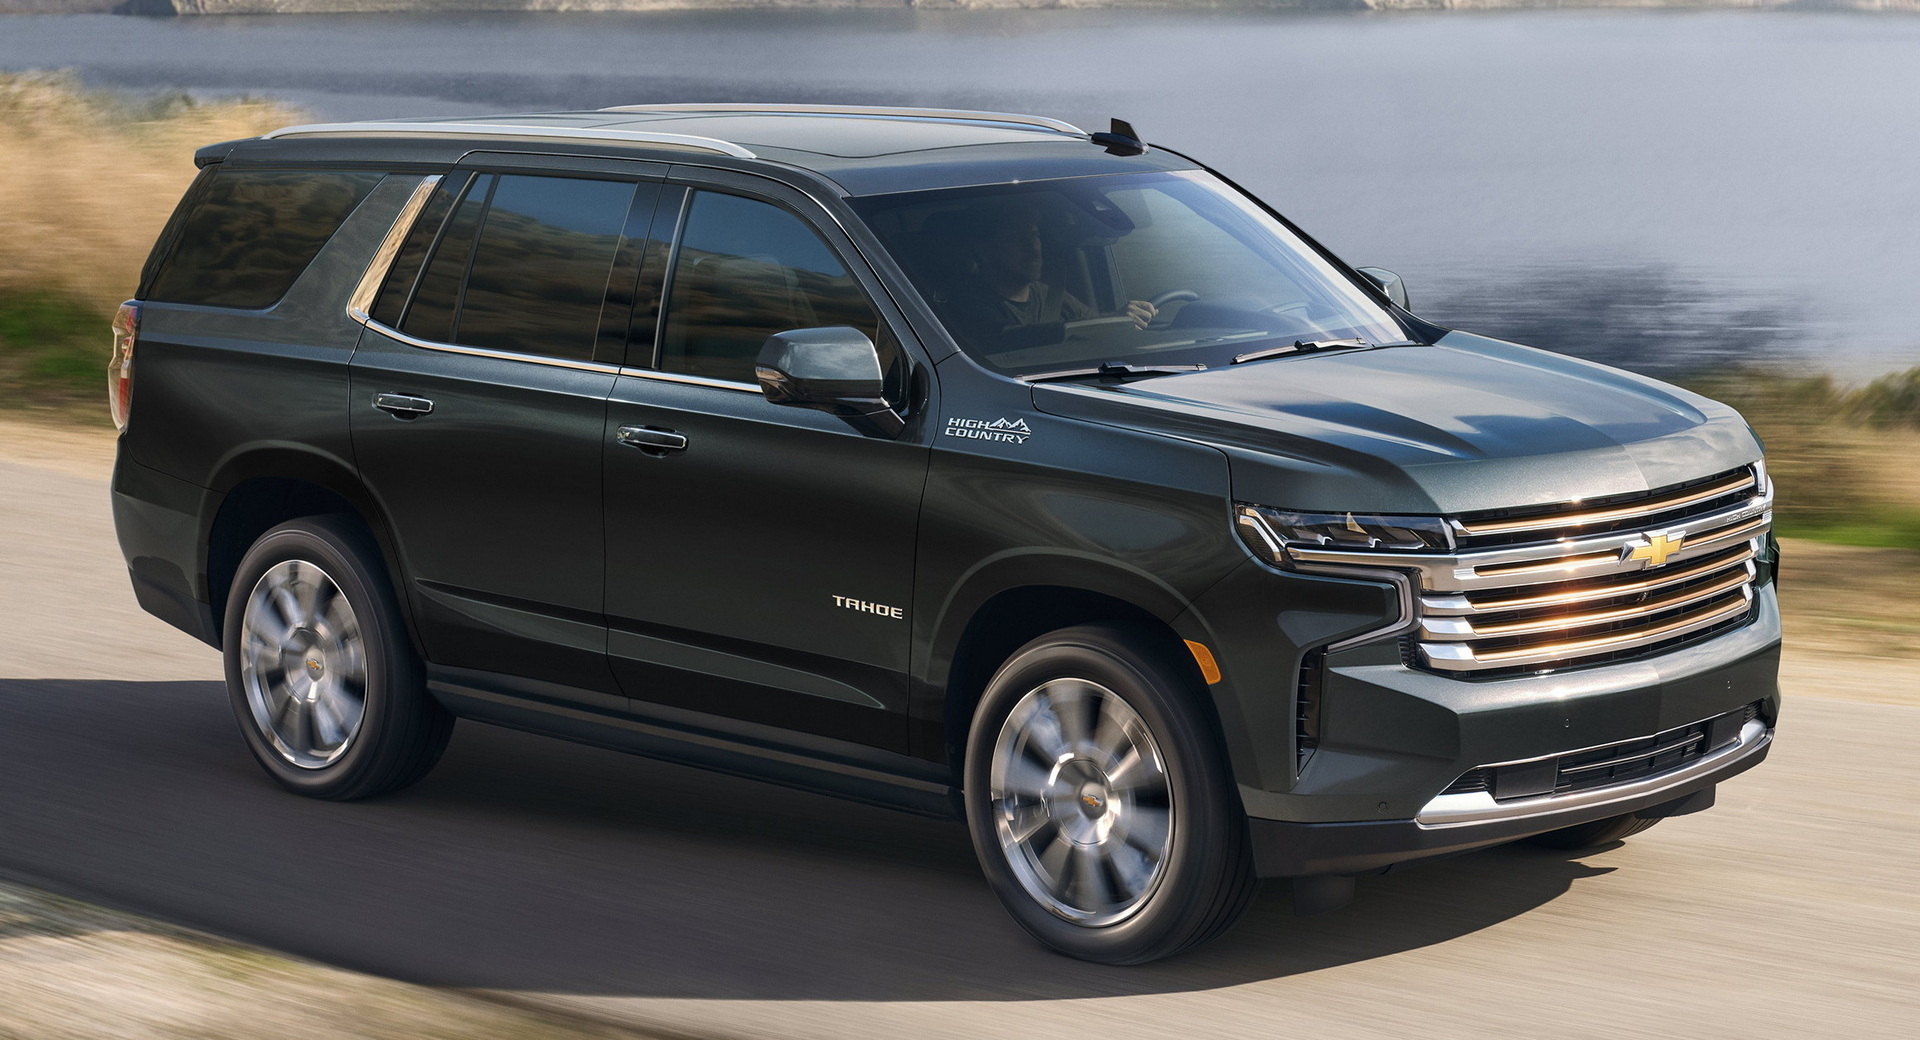 Pictures of 2022 chevy tahoe